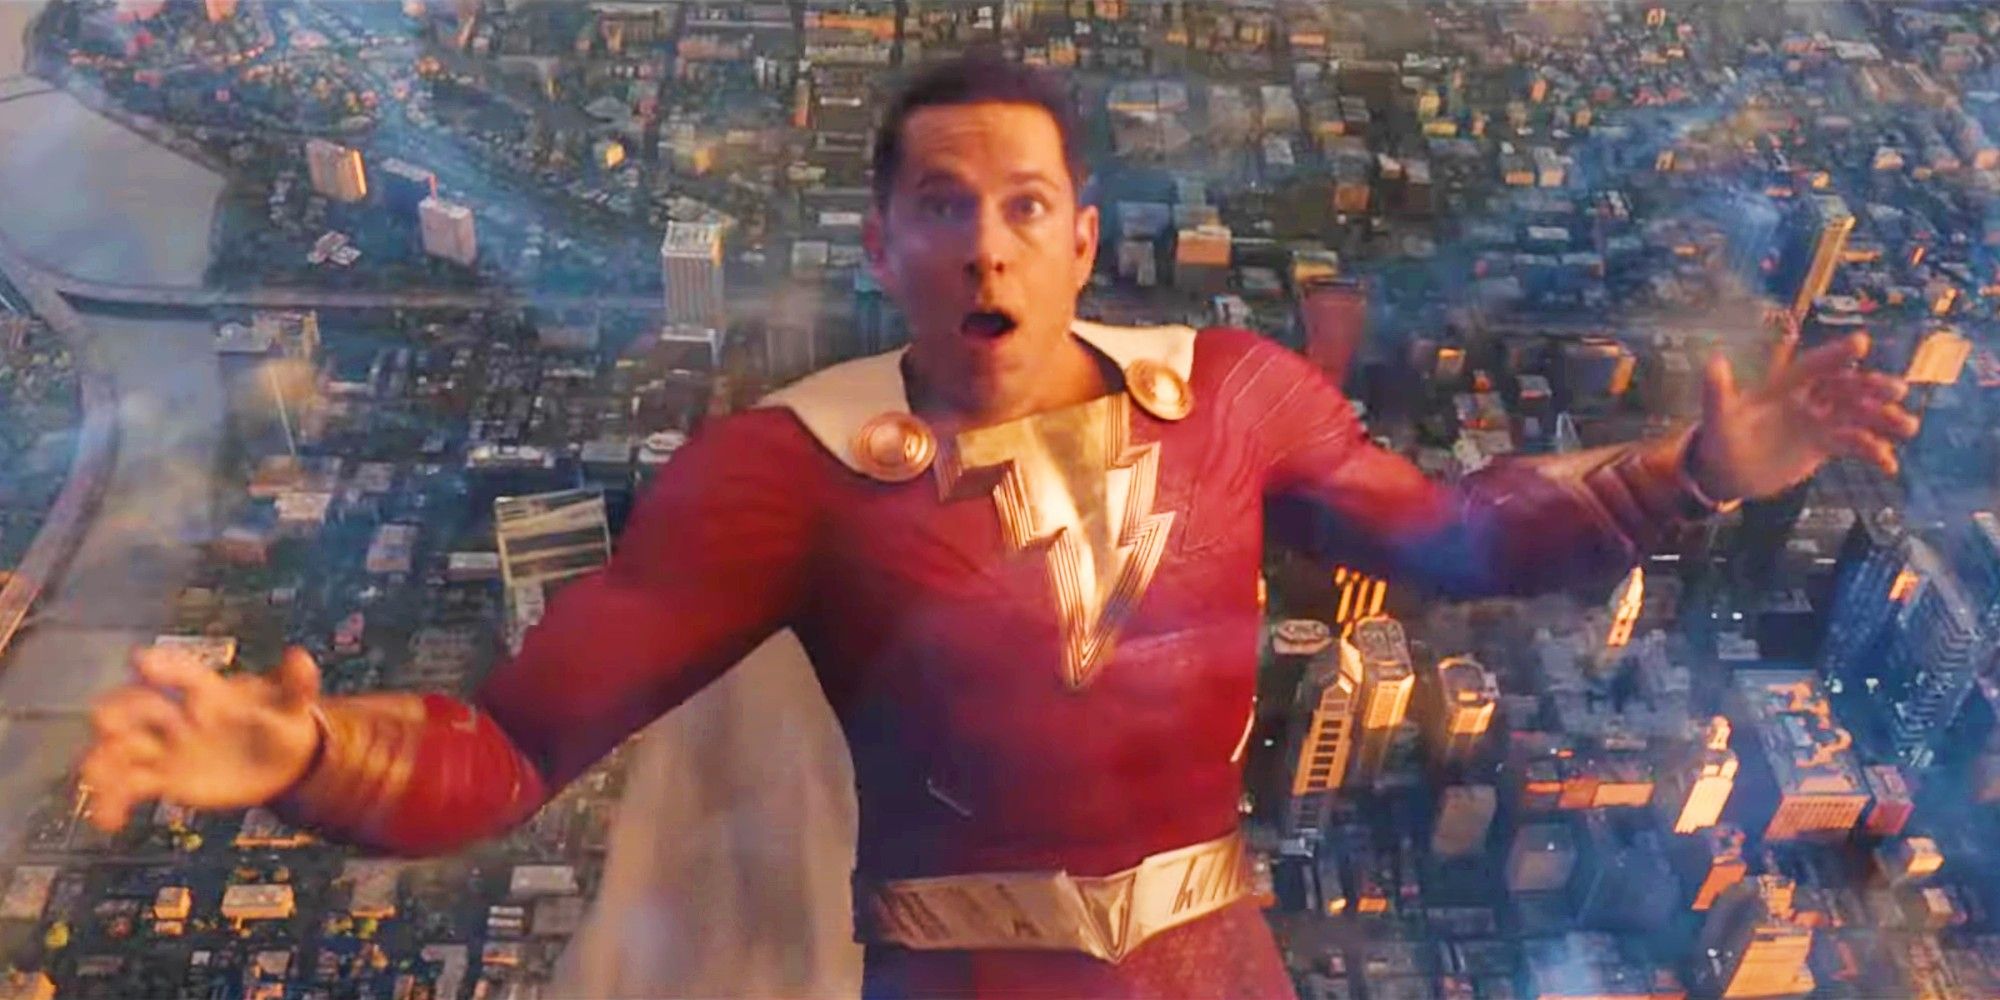 Zachary_Levi_as_Billy_Batson_after_flying_into_magic_barrier_in_Shazam_Fury_of_the_Gods